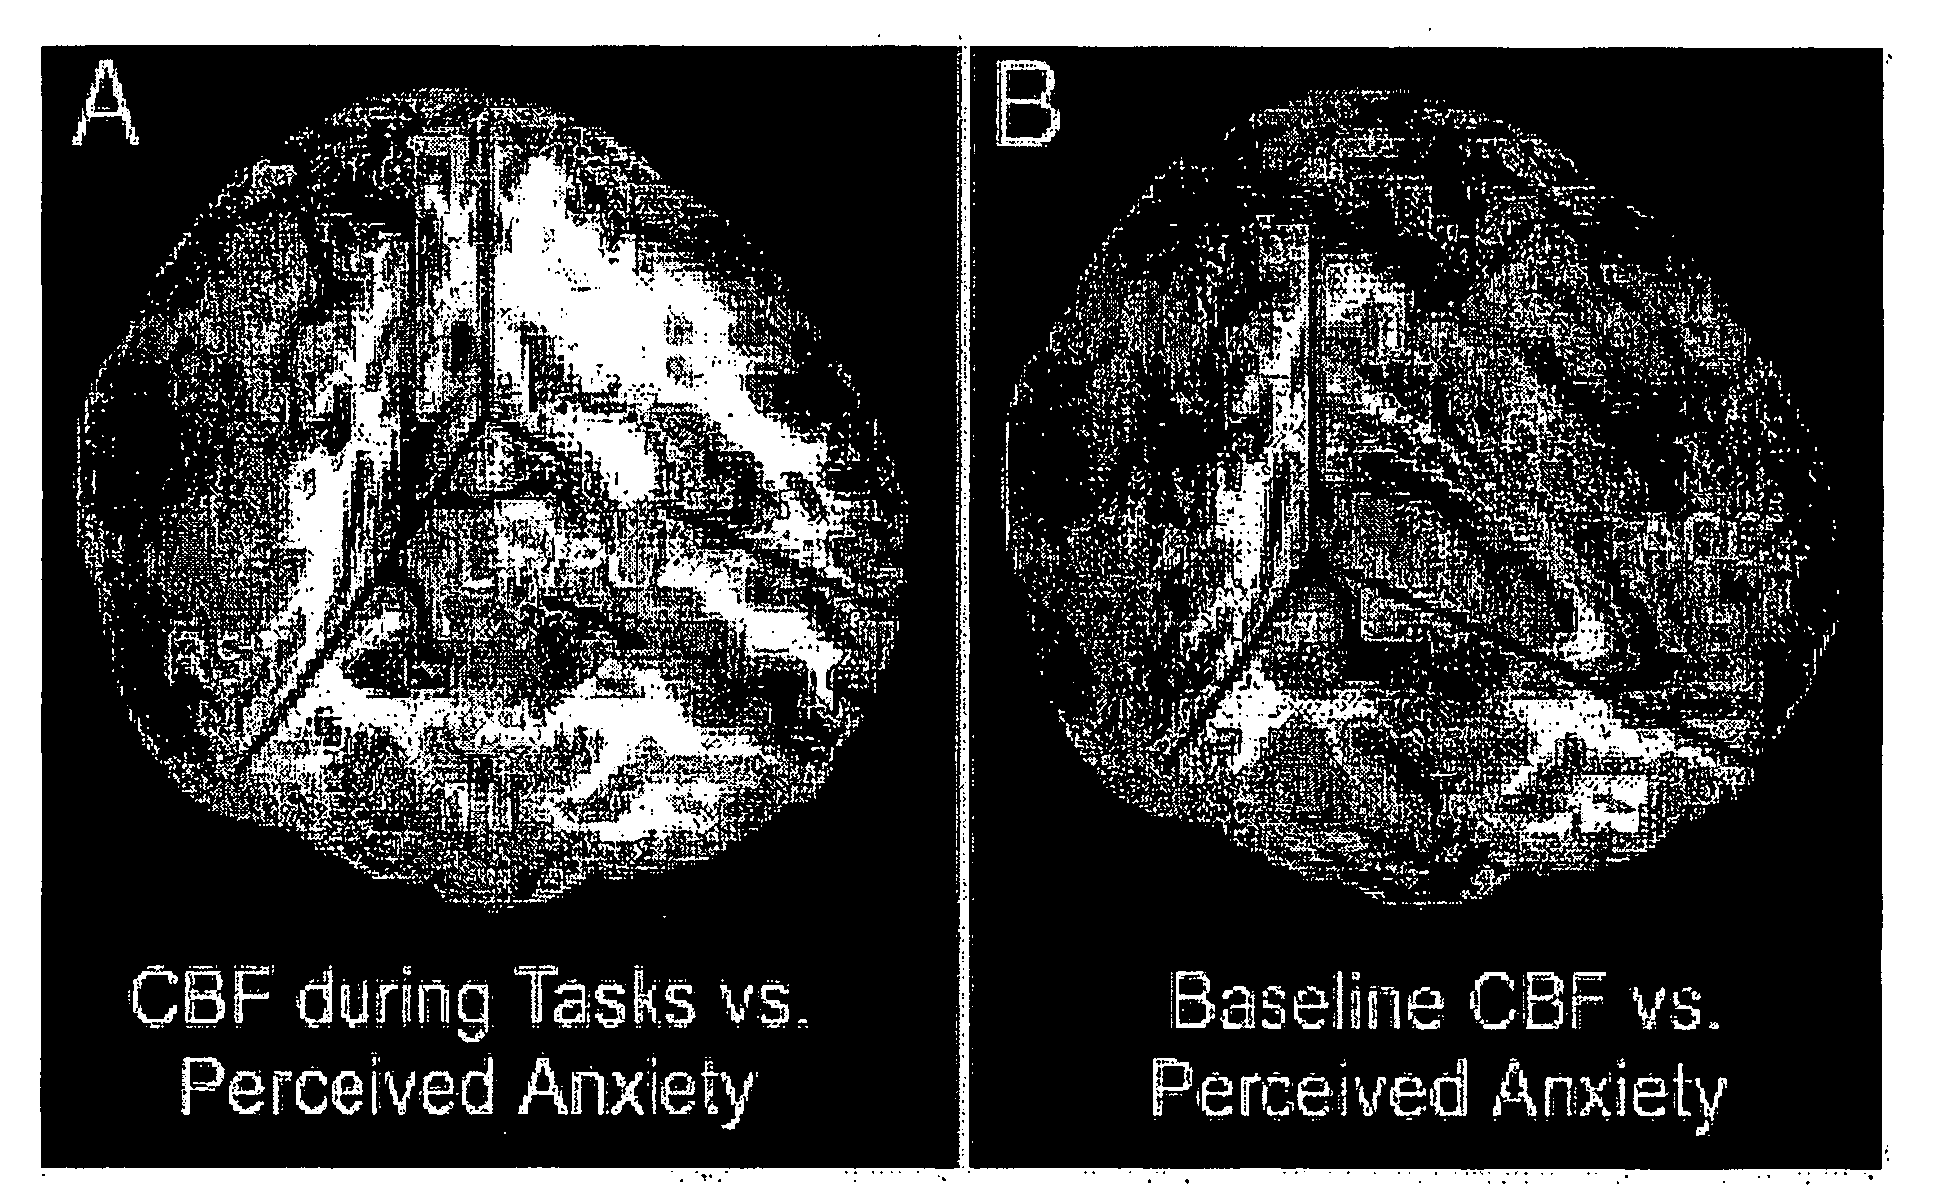 Assessing subject's reactivity to psychological stress using fmri